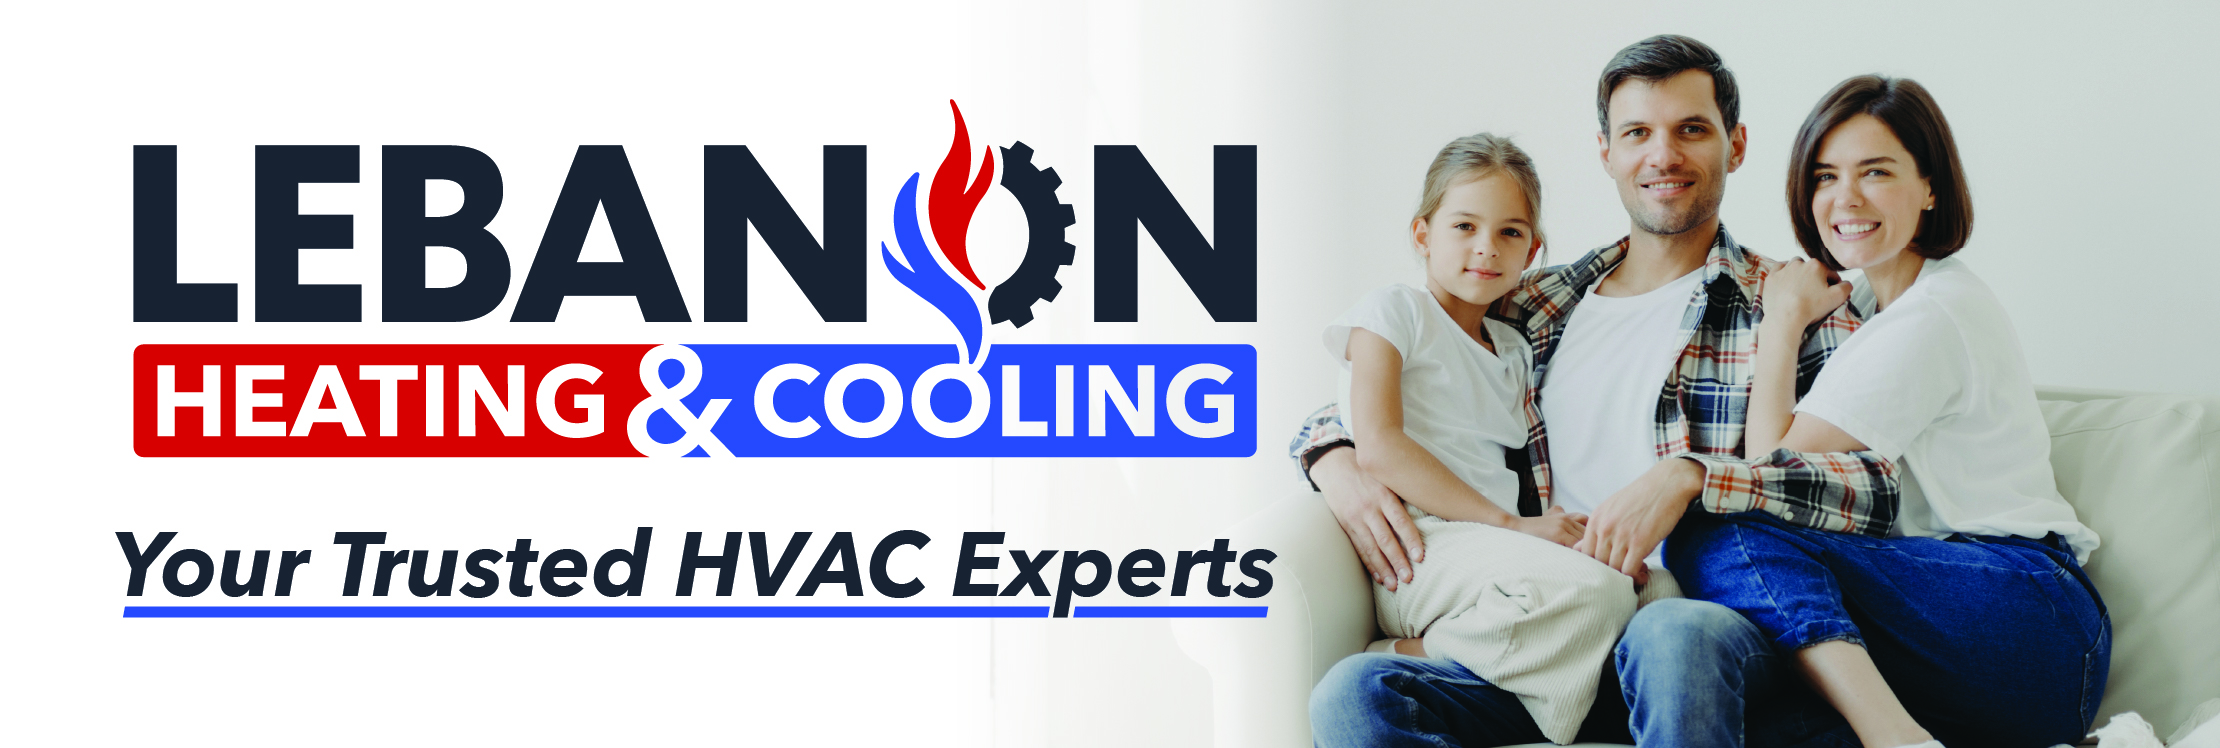 Lebanon Heating & Cooling reviews | 212 North Broadway Office #7 - Lebanon OH